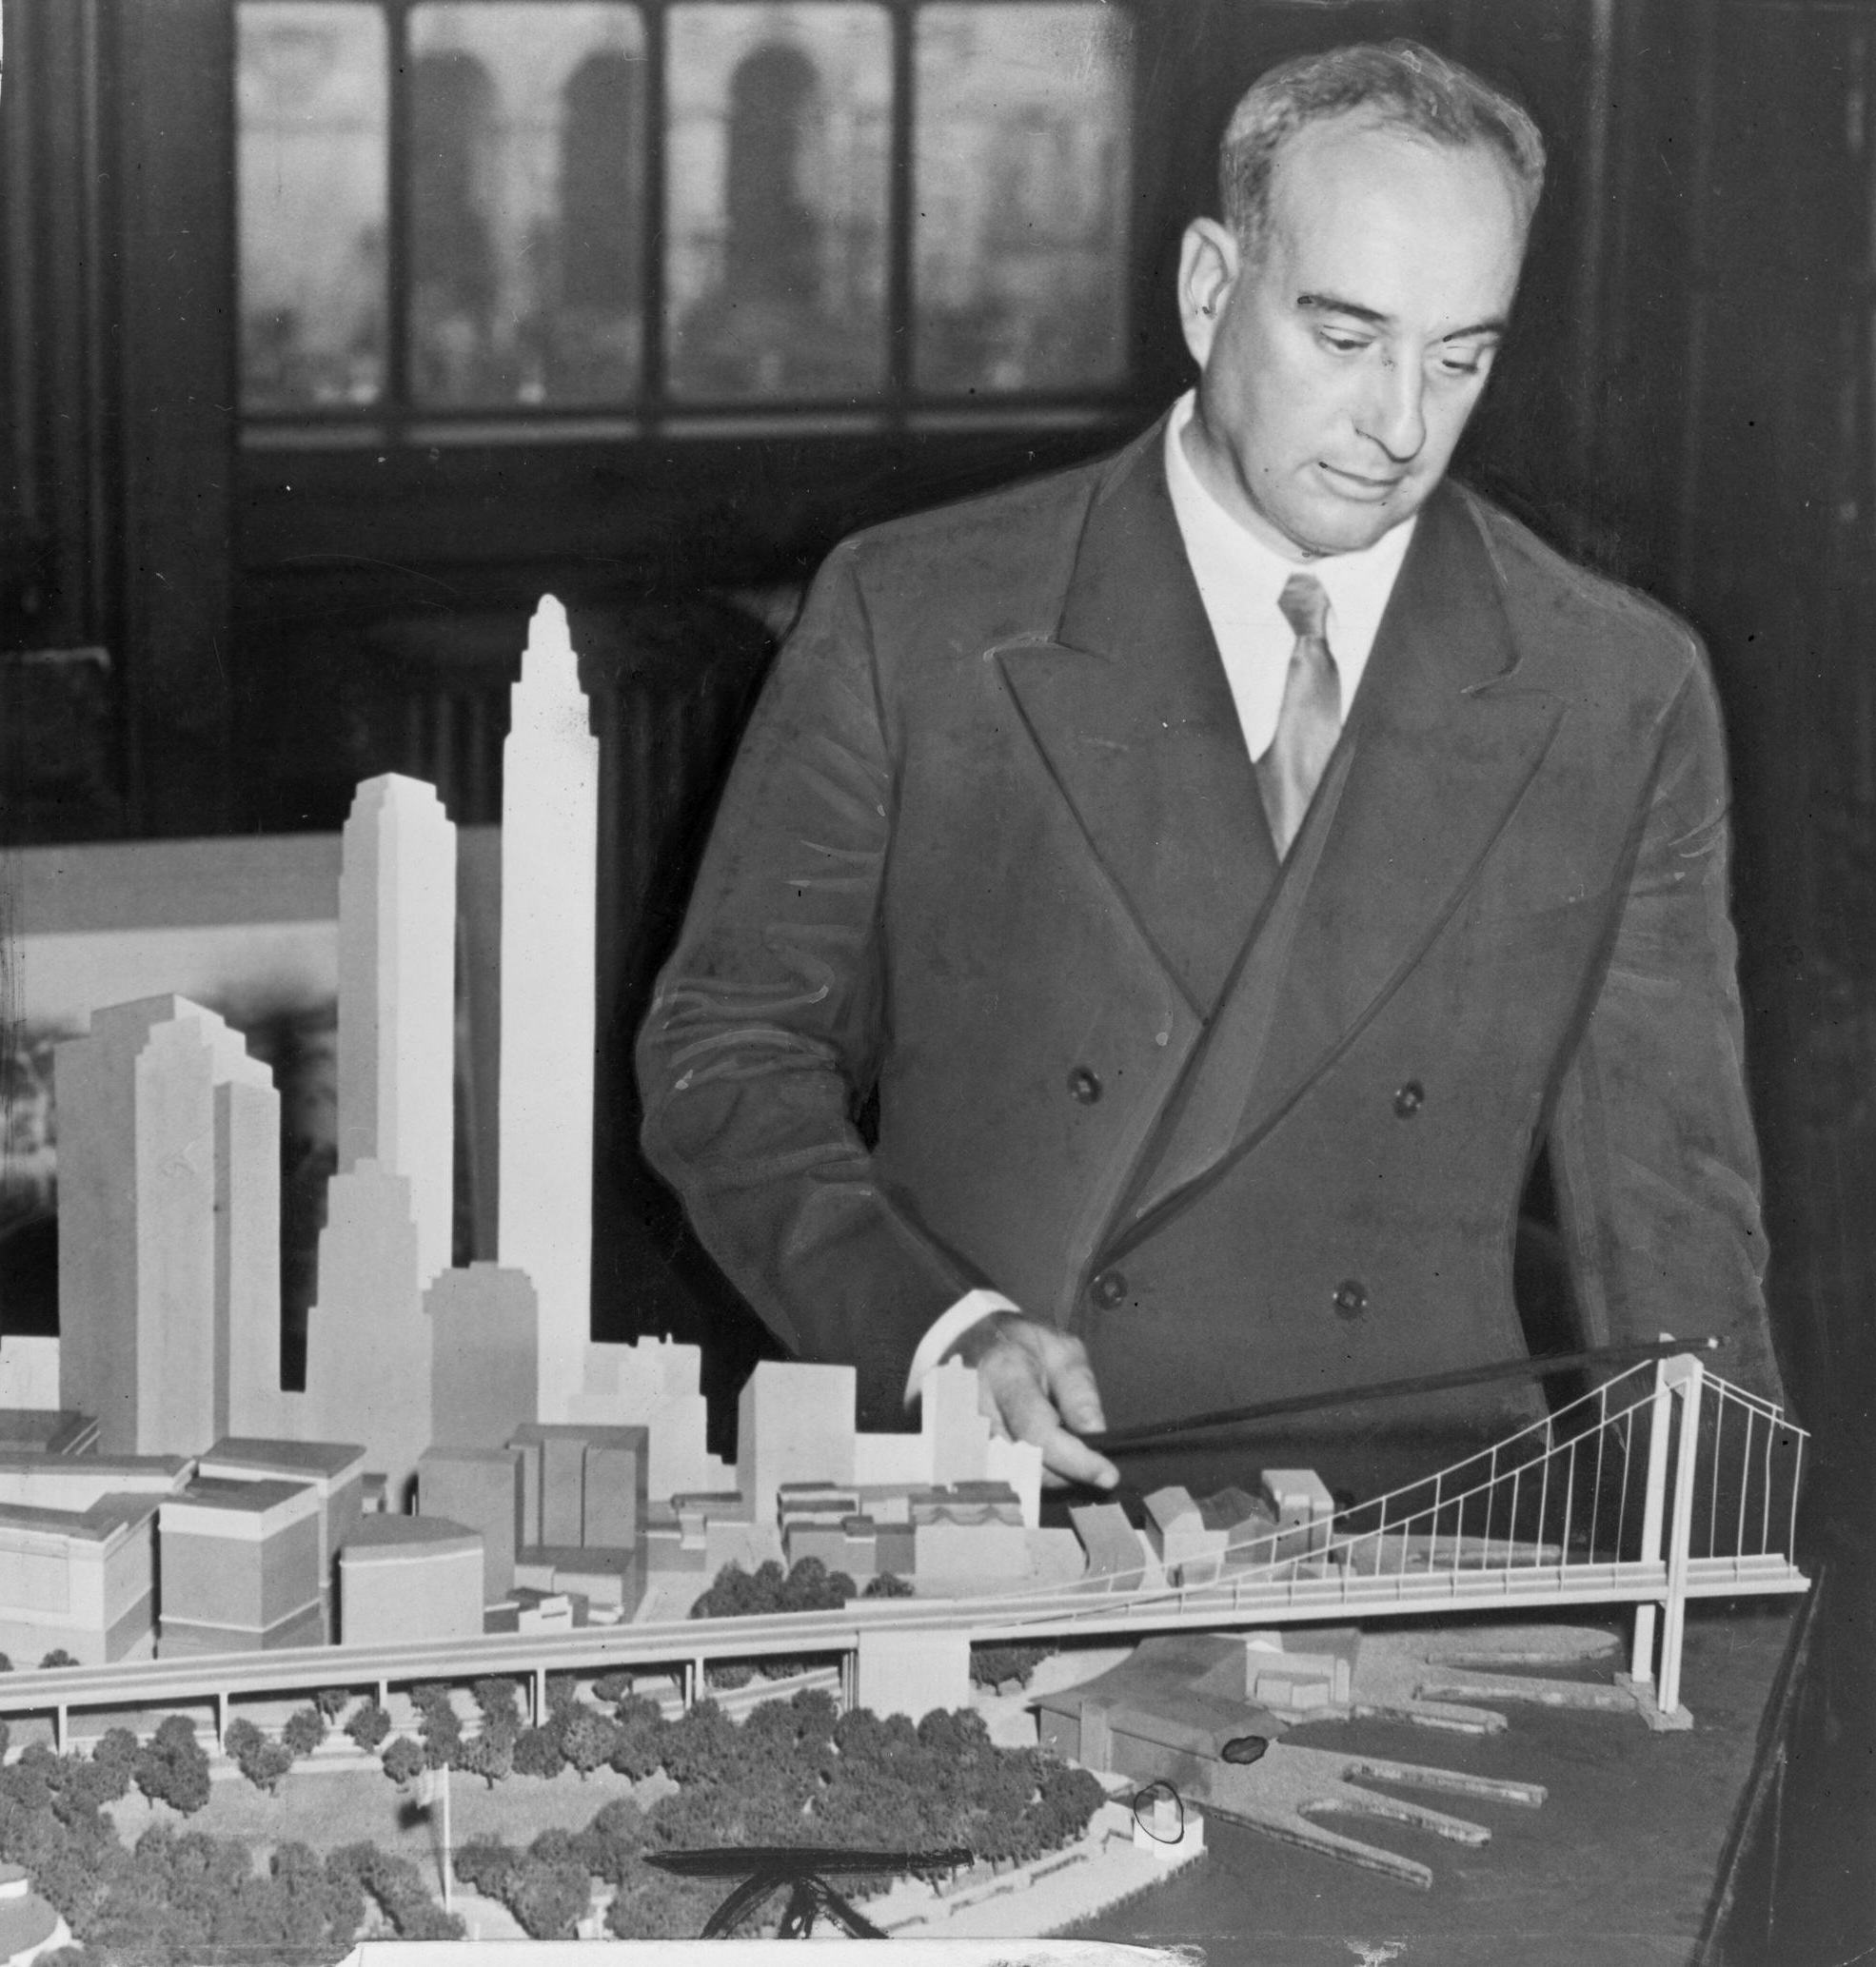 http://upload.wikimedia.org/wikipedia/commons/a/ab/Robert_Moses_with_Battery_Bridge_model.jpg